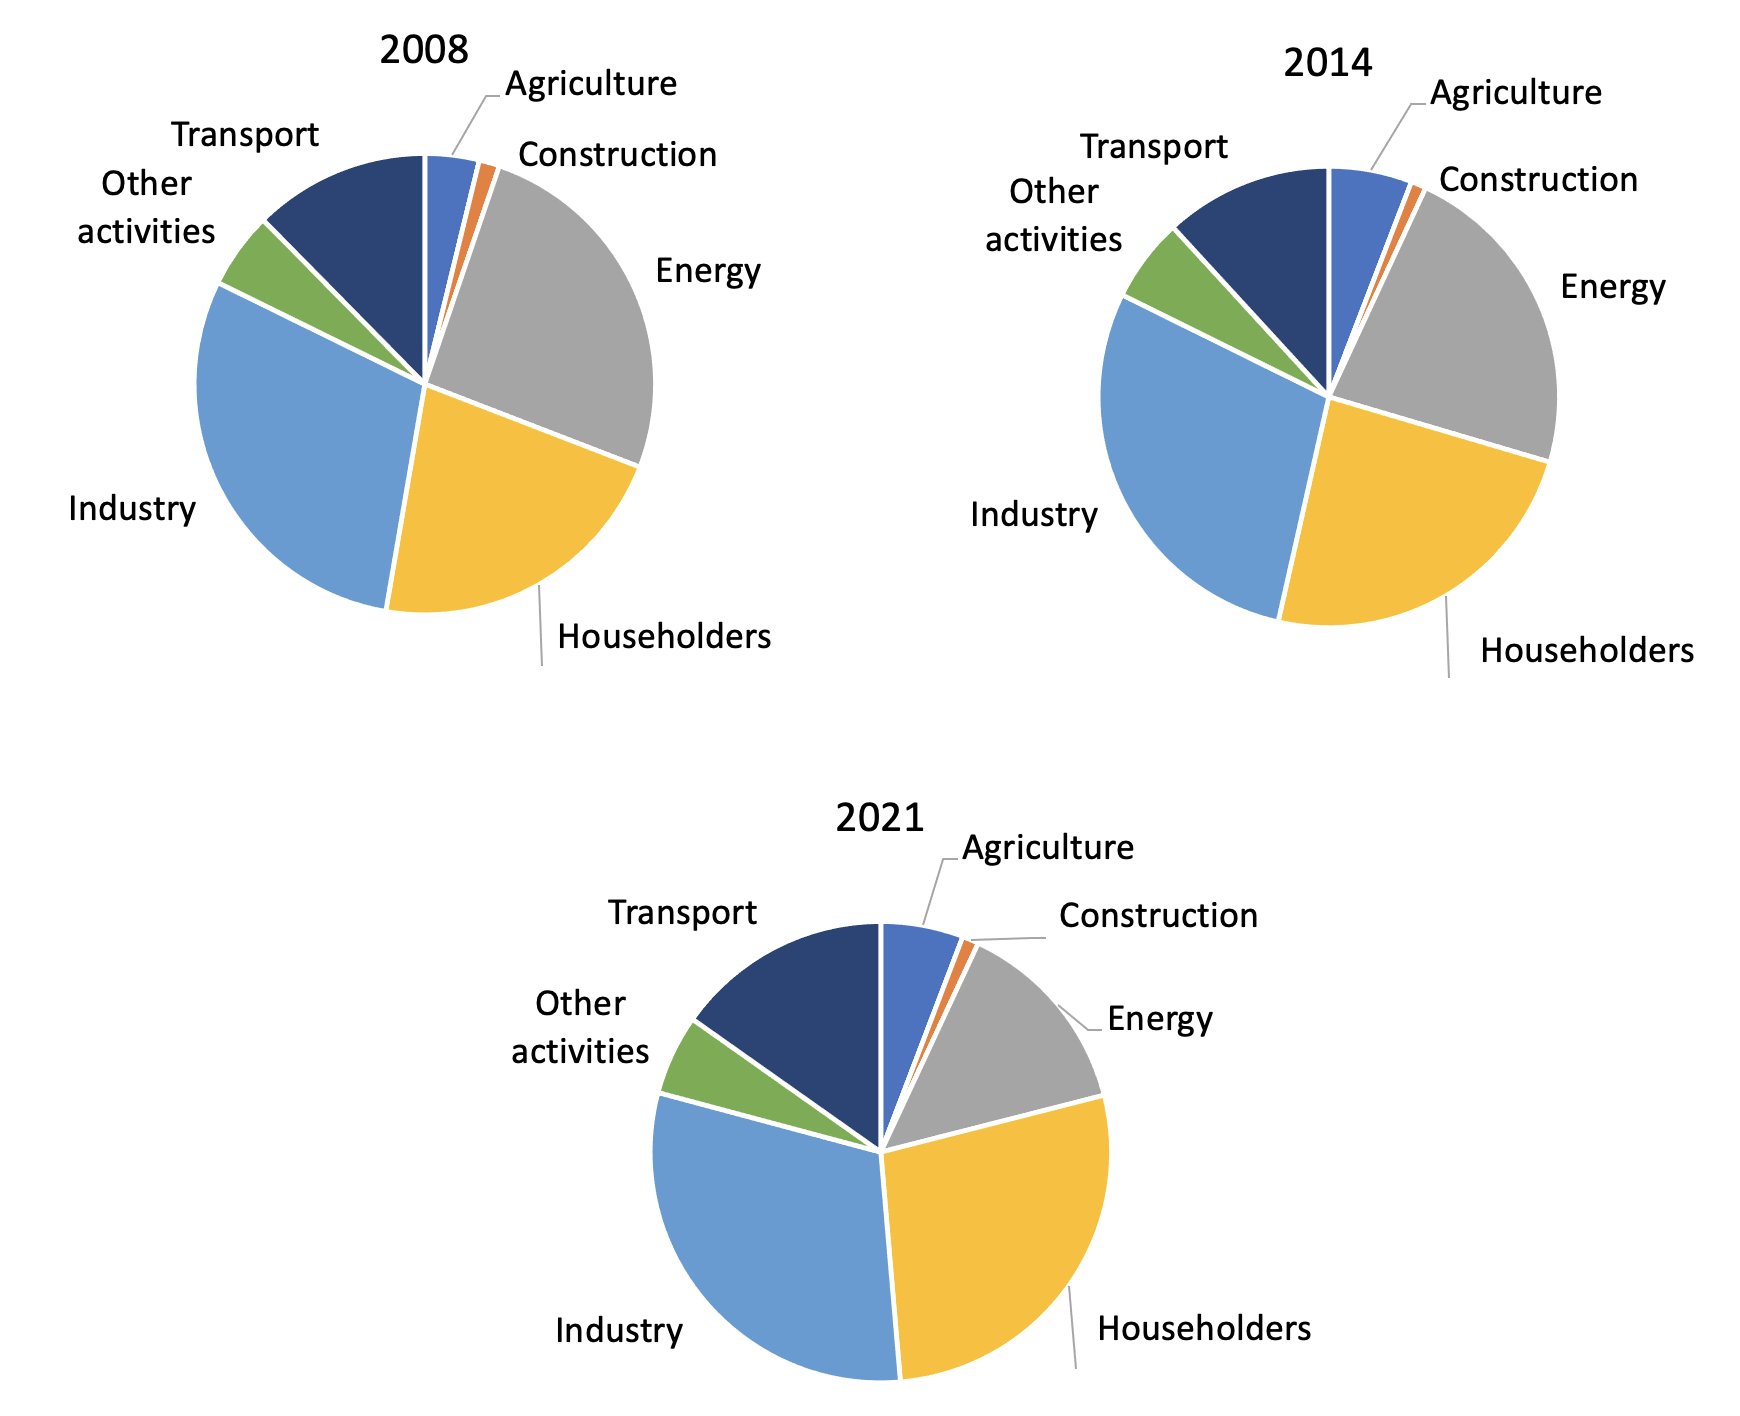 Figure 3 The energy sector has decreased its share of greenhouse gas emissions, while the agricultural sector has increased its contribution